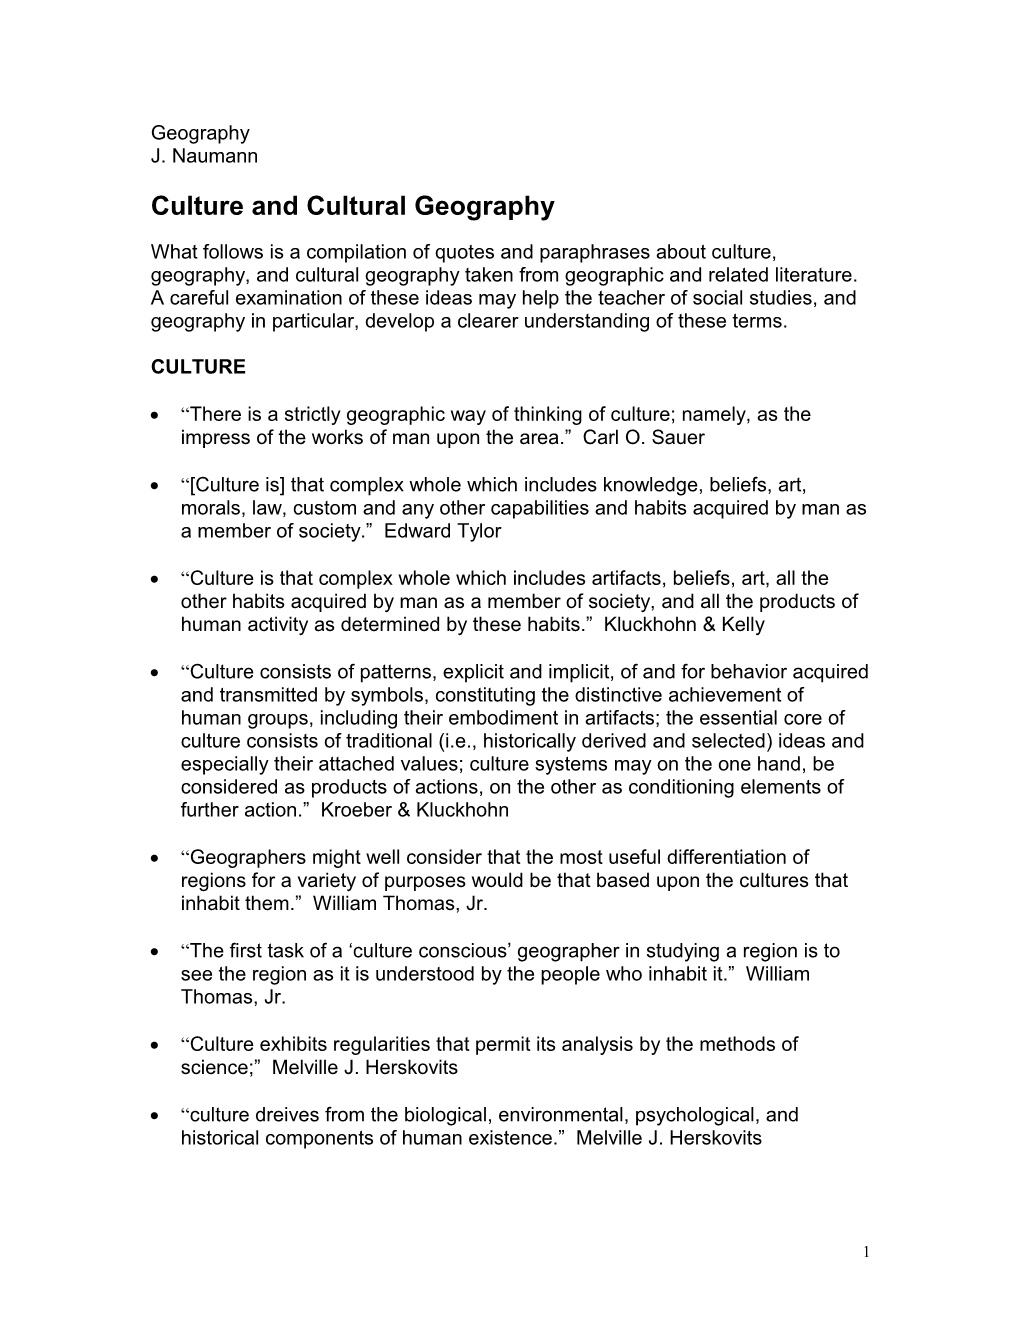 Culture and Cultural Geography